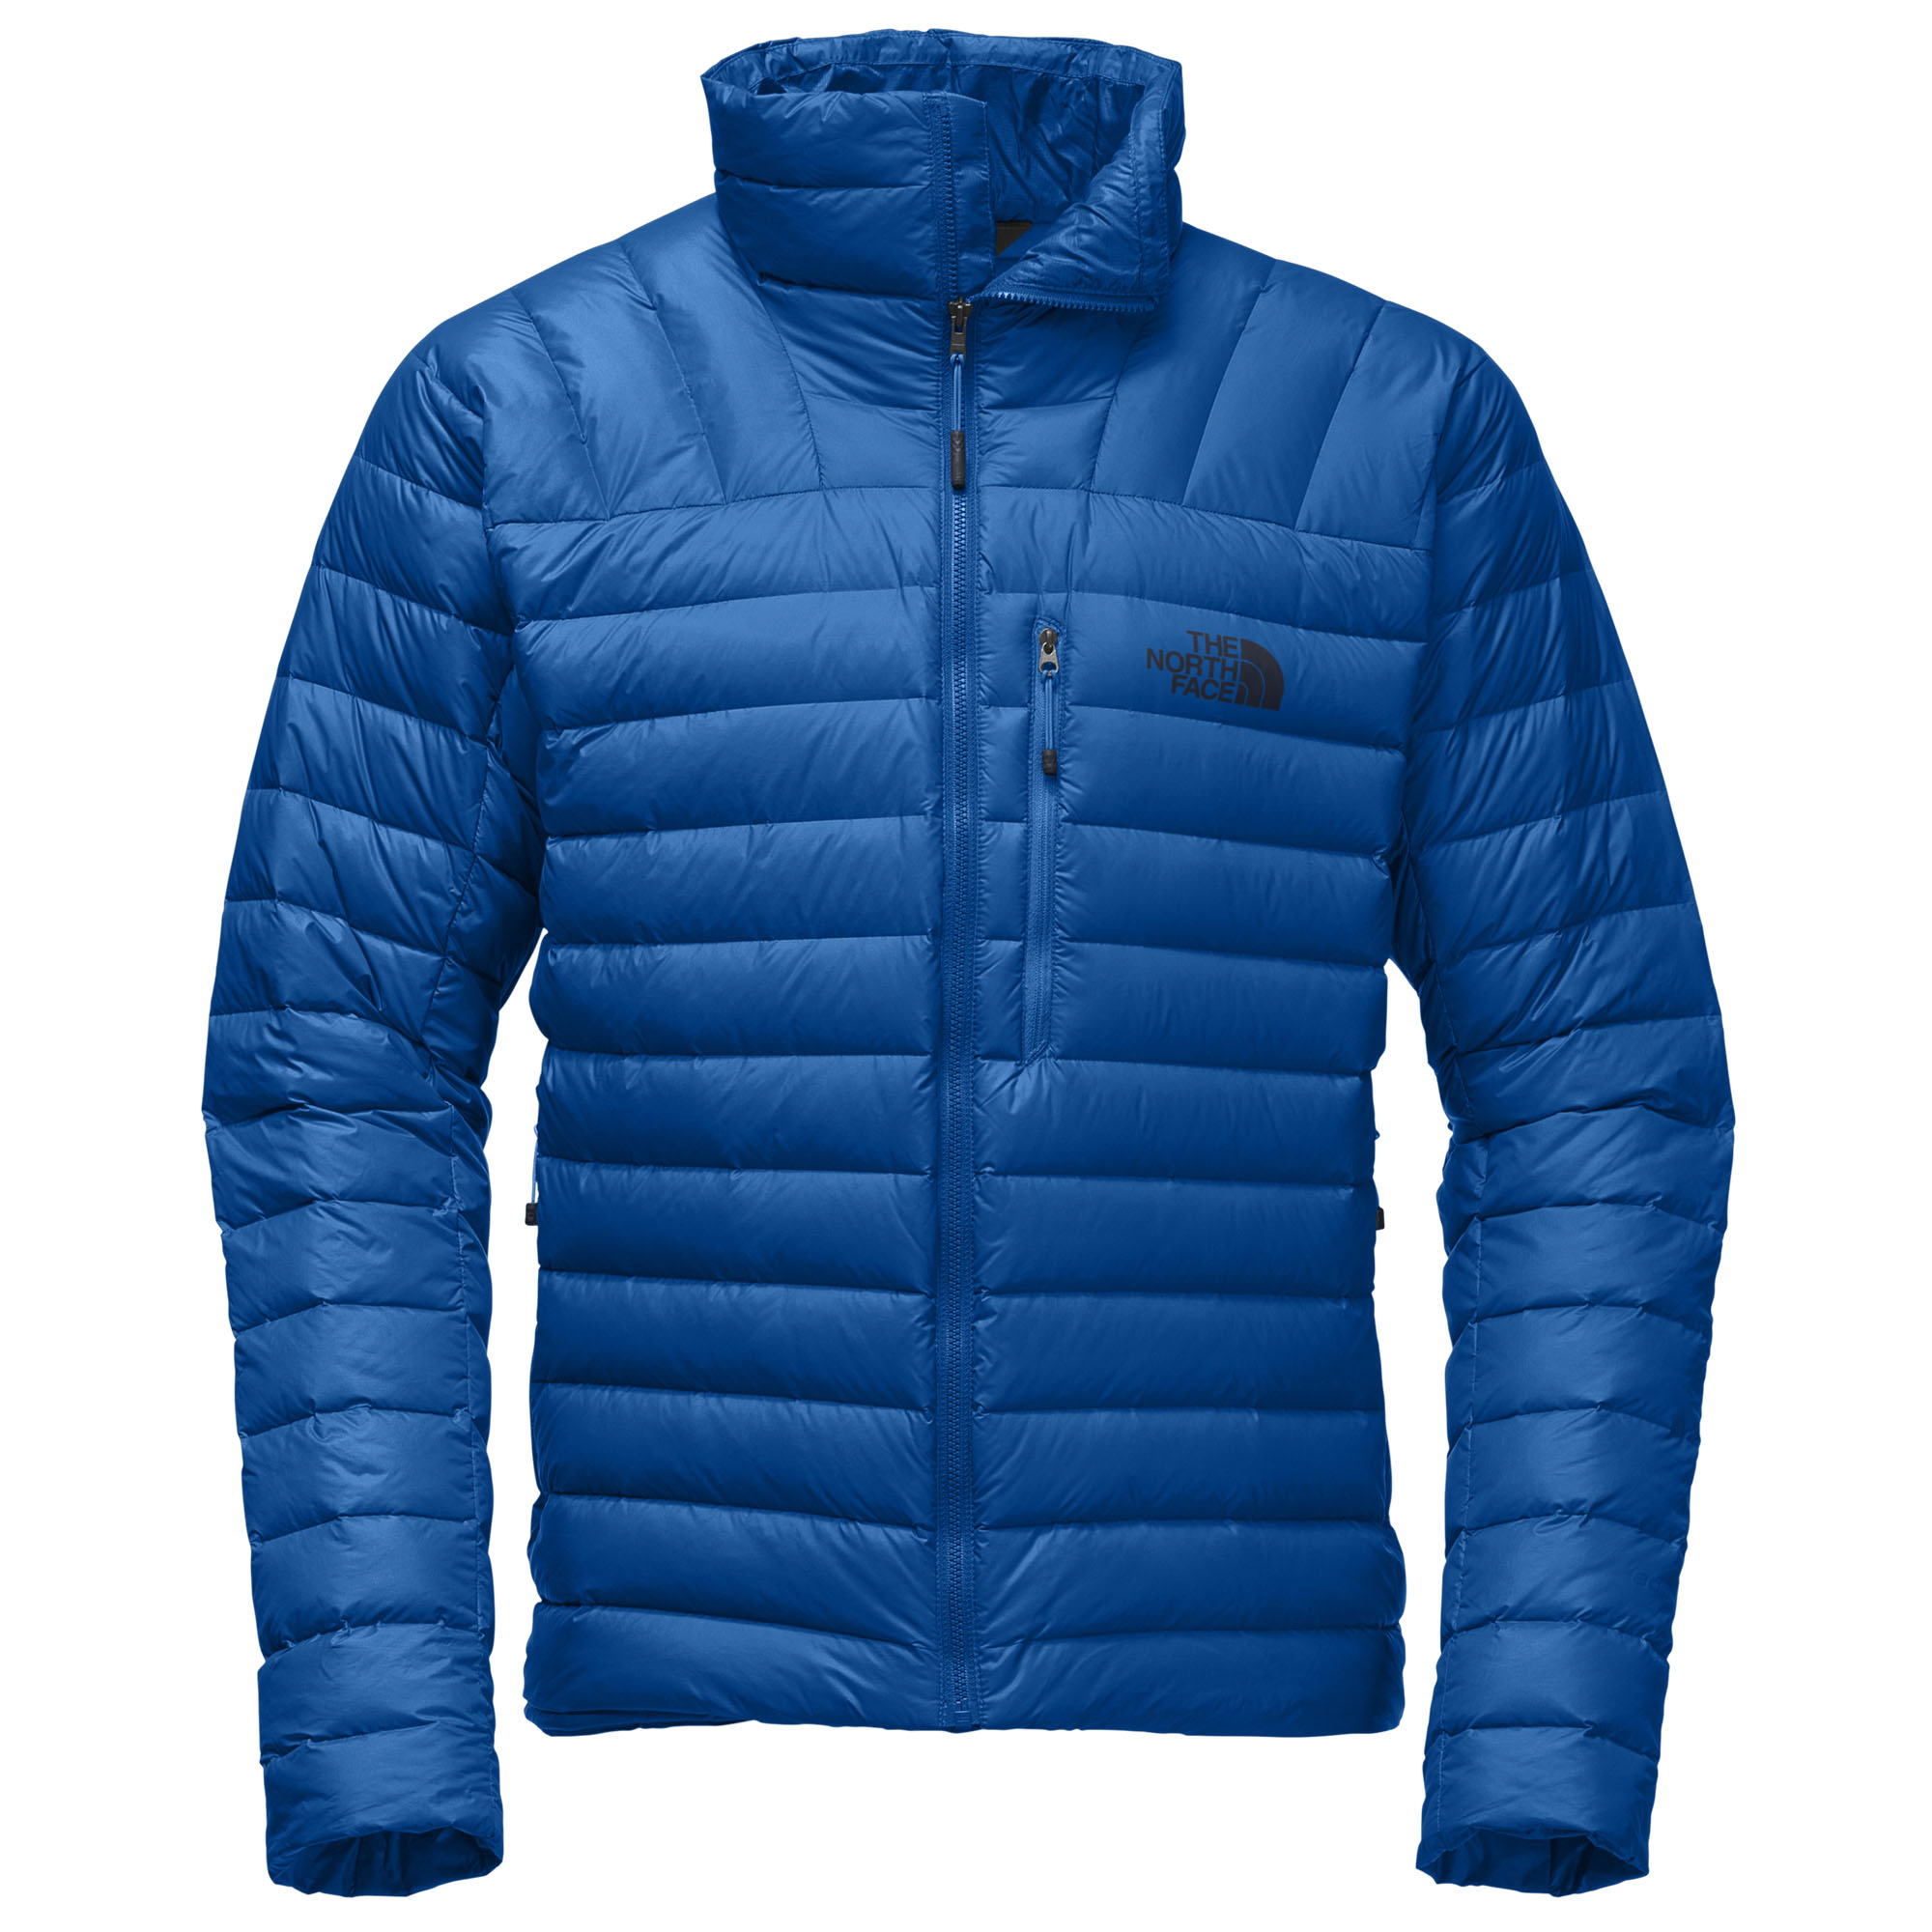 the north face morph jacket